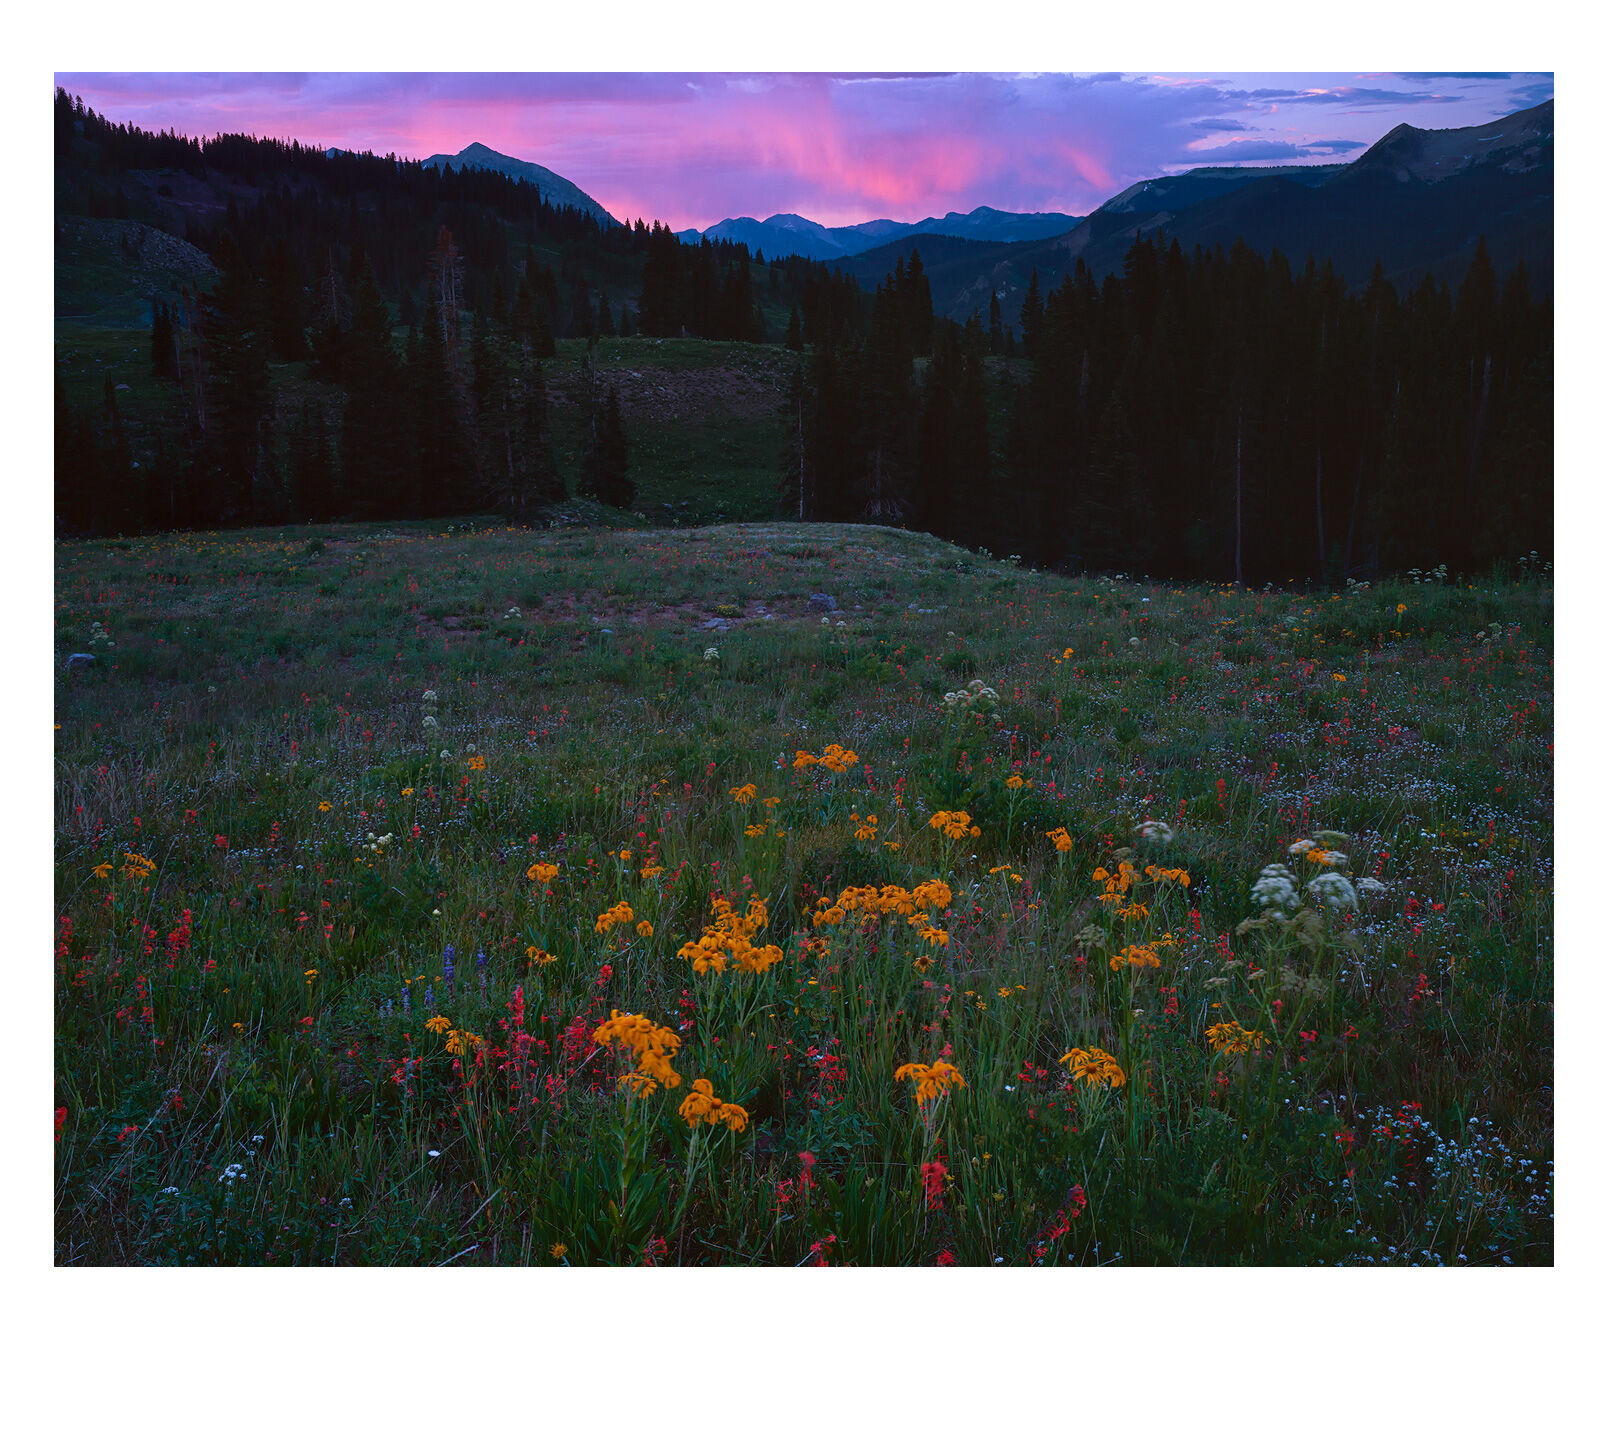 I captured this display of light and summer alpine wildflowers just after sunset on a beautiful July evening. I had another composition...